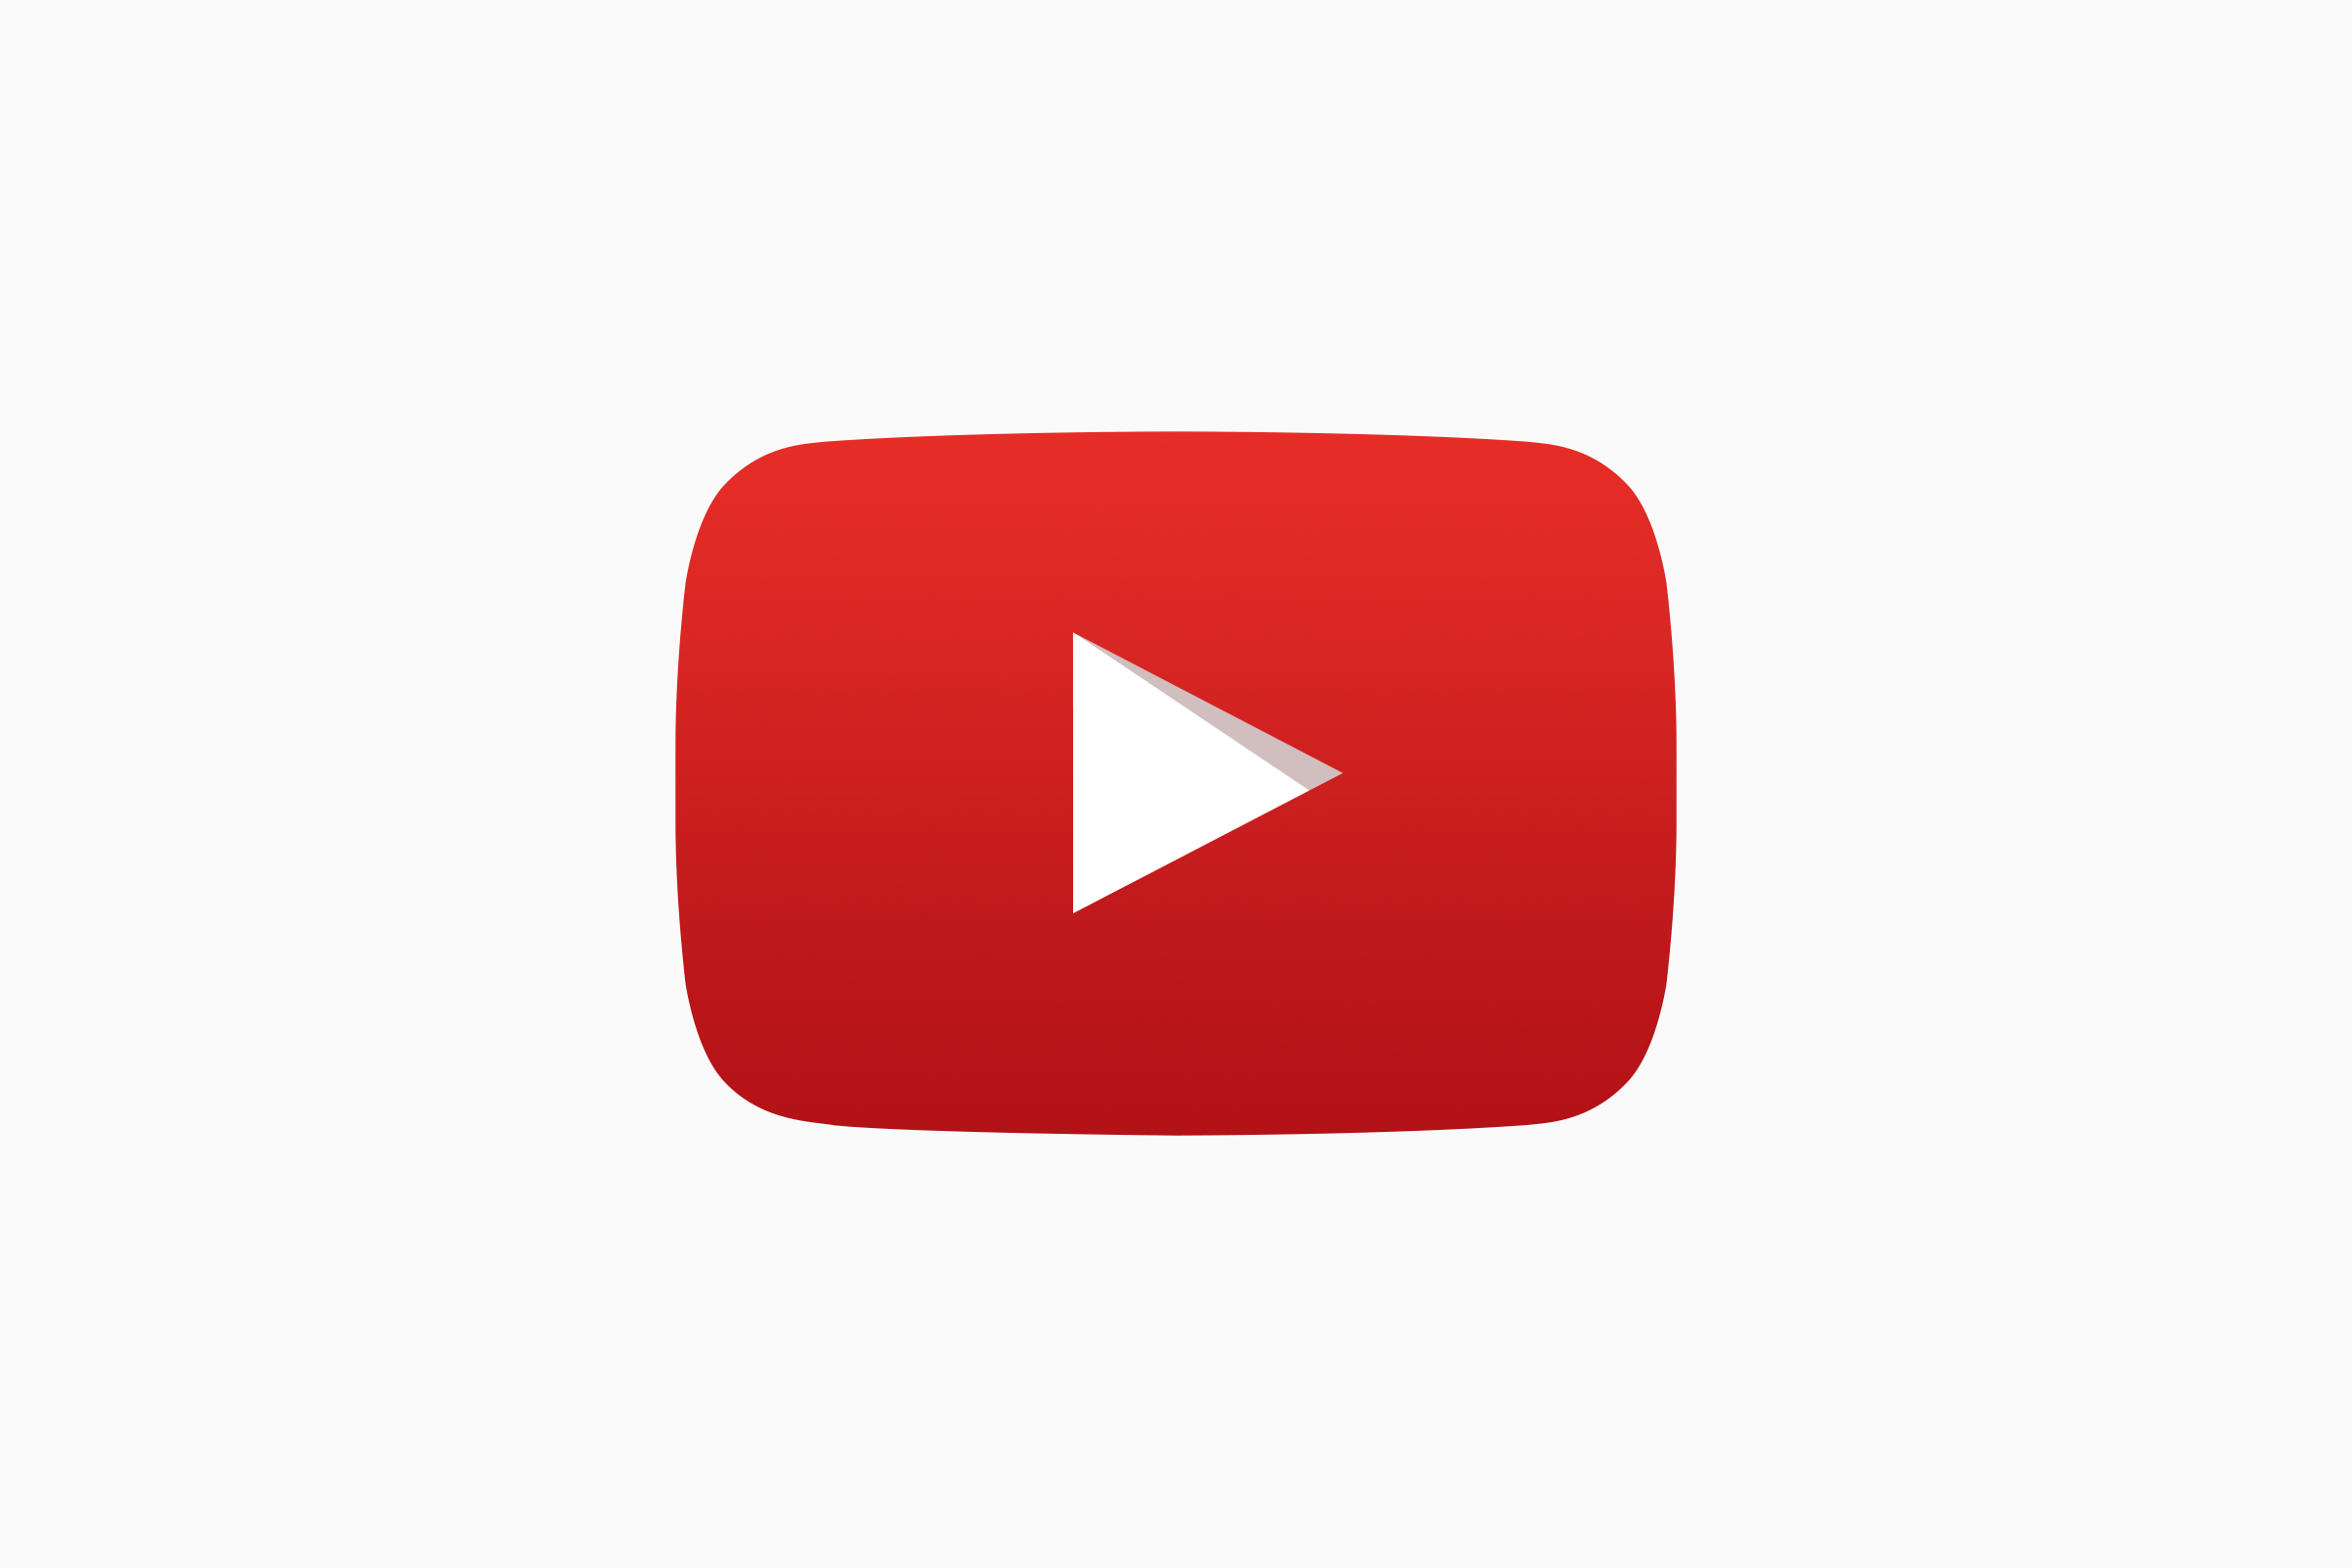 YouTube may launch a paid TV Service soon